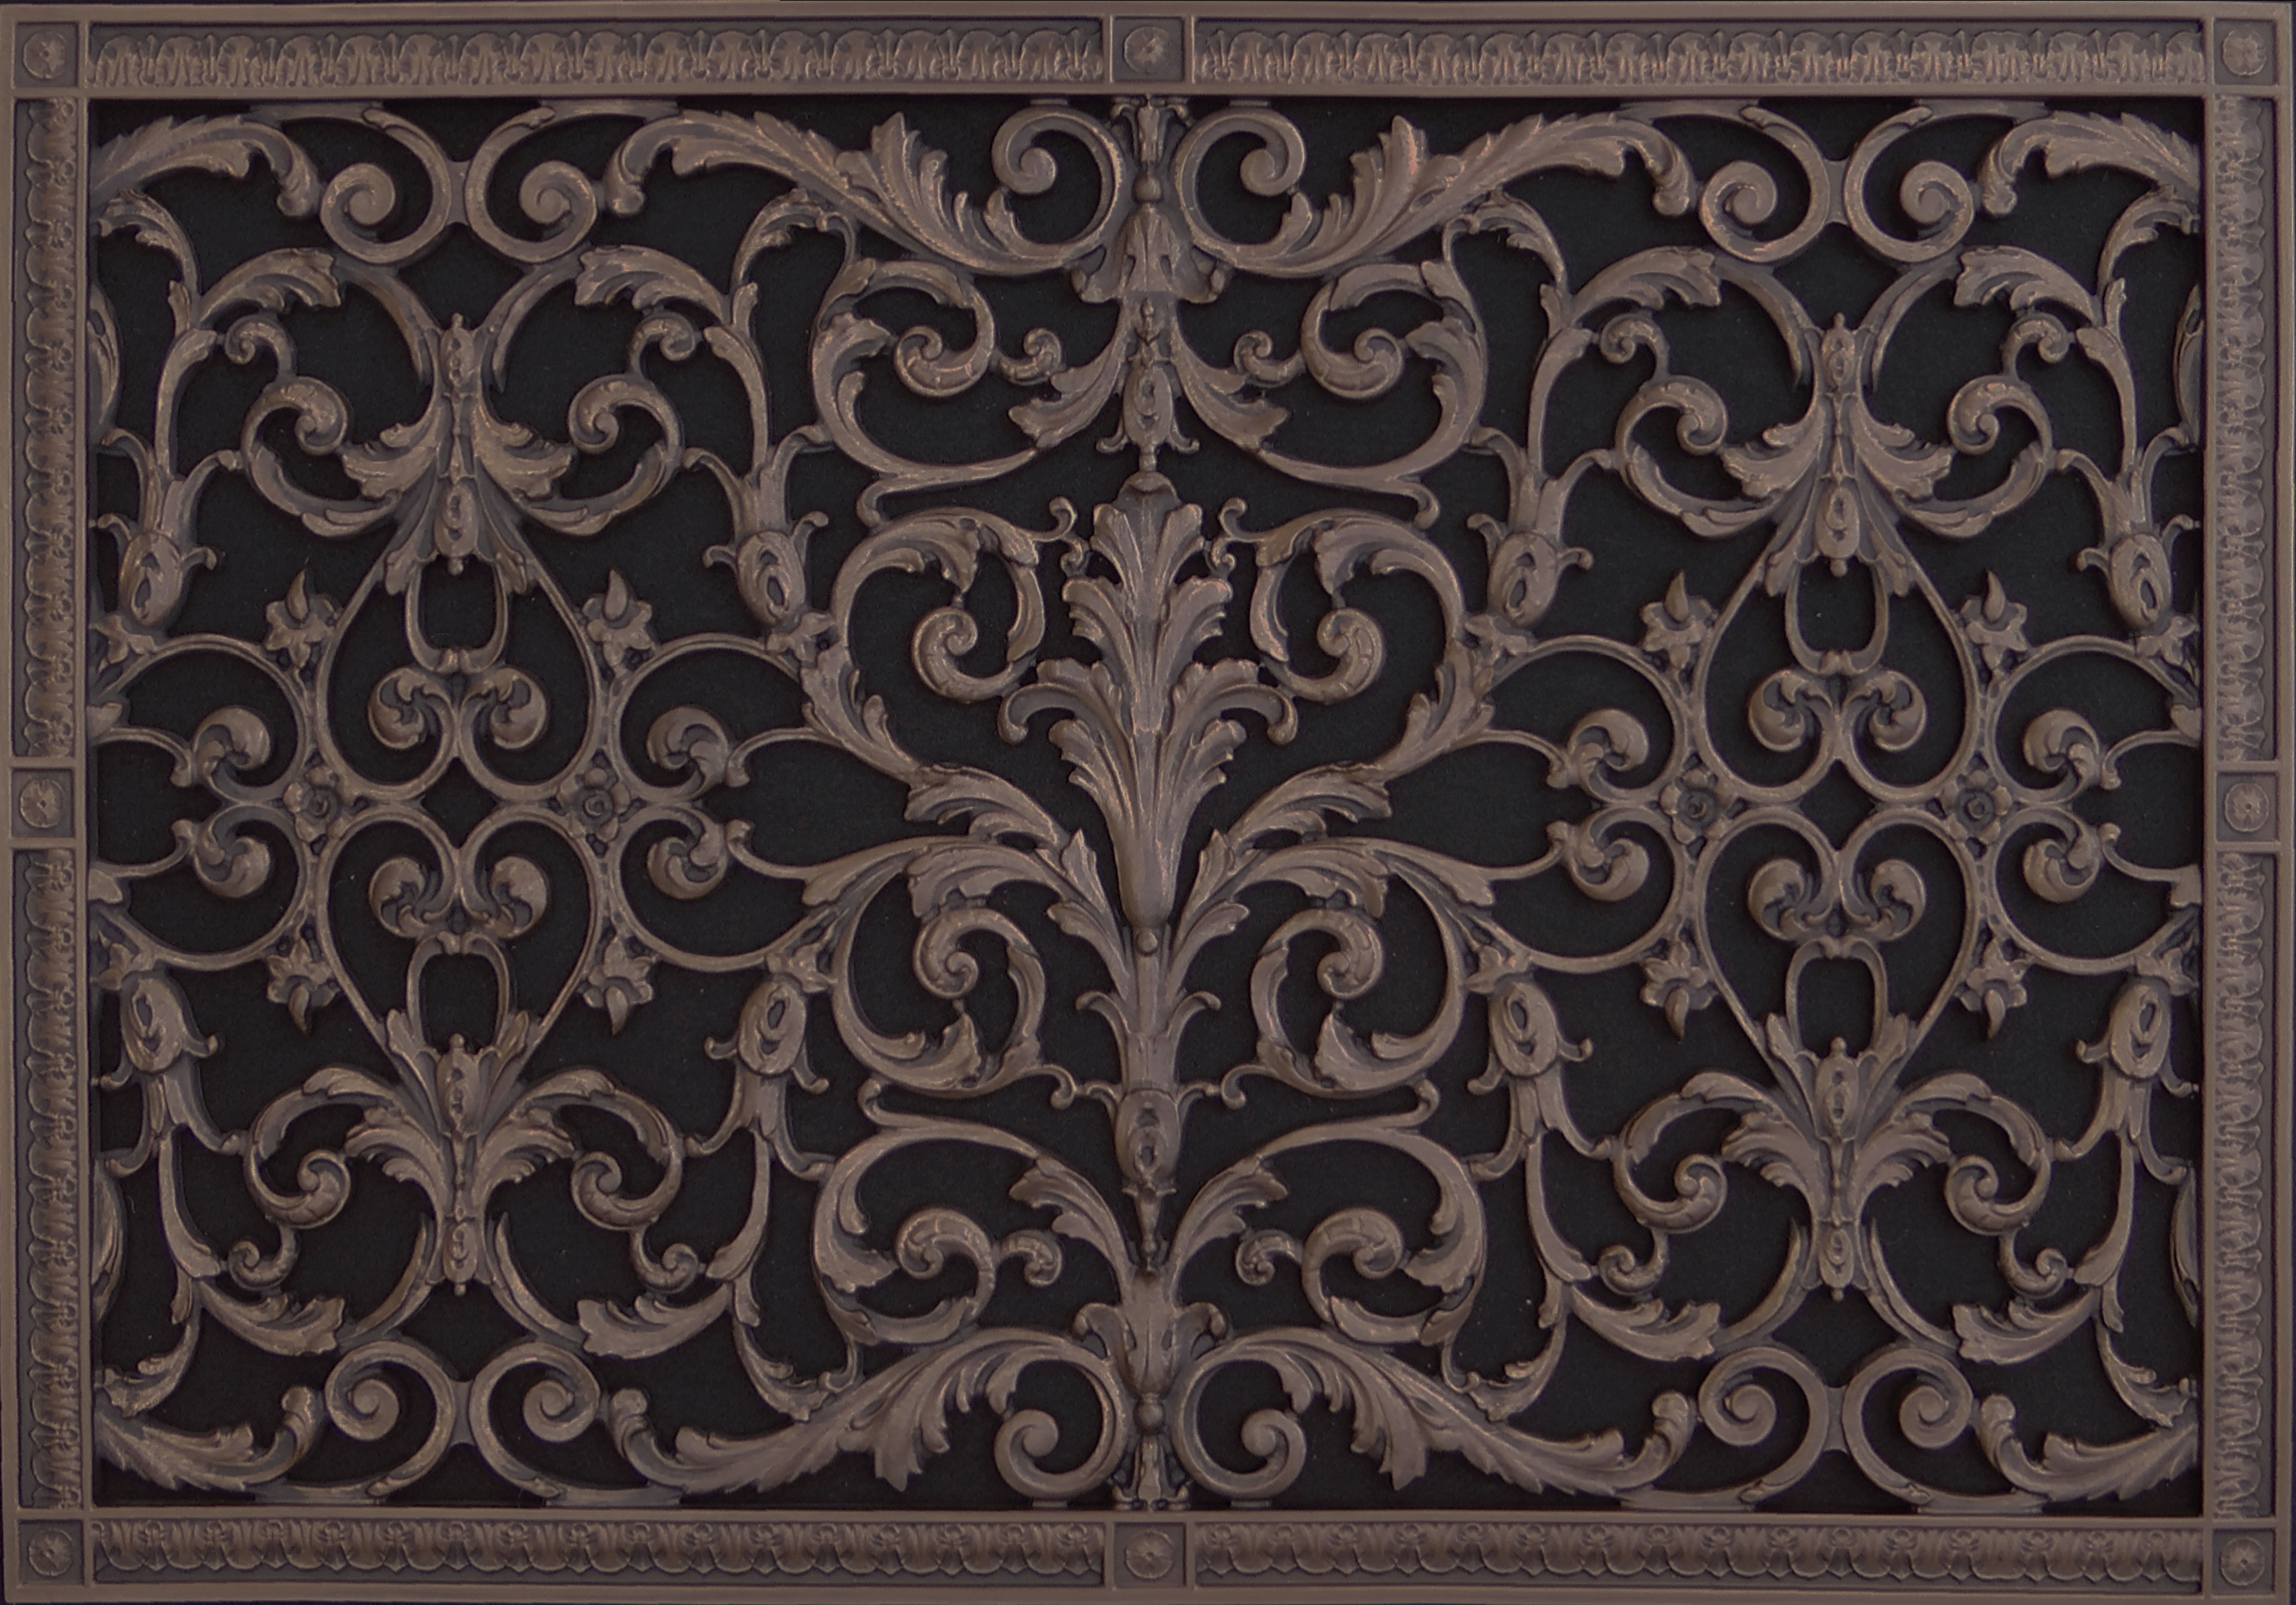 Decorative grille in Louis XIV style 20x30